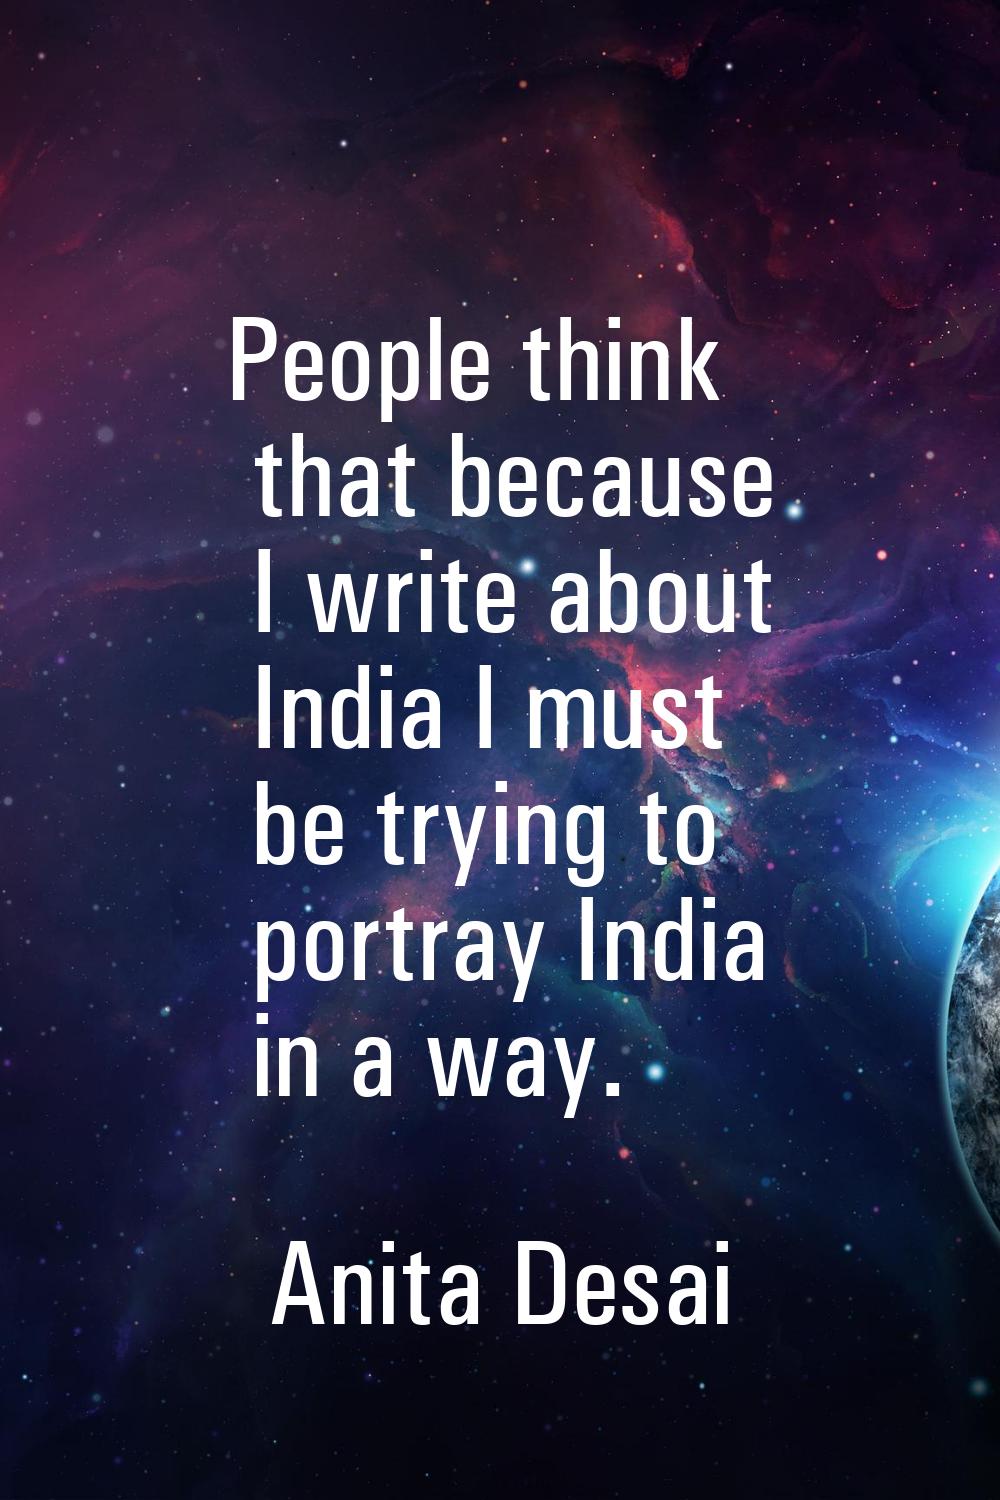 People think that because I write about India I must be trying to portray India in a way.